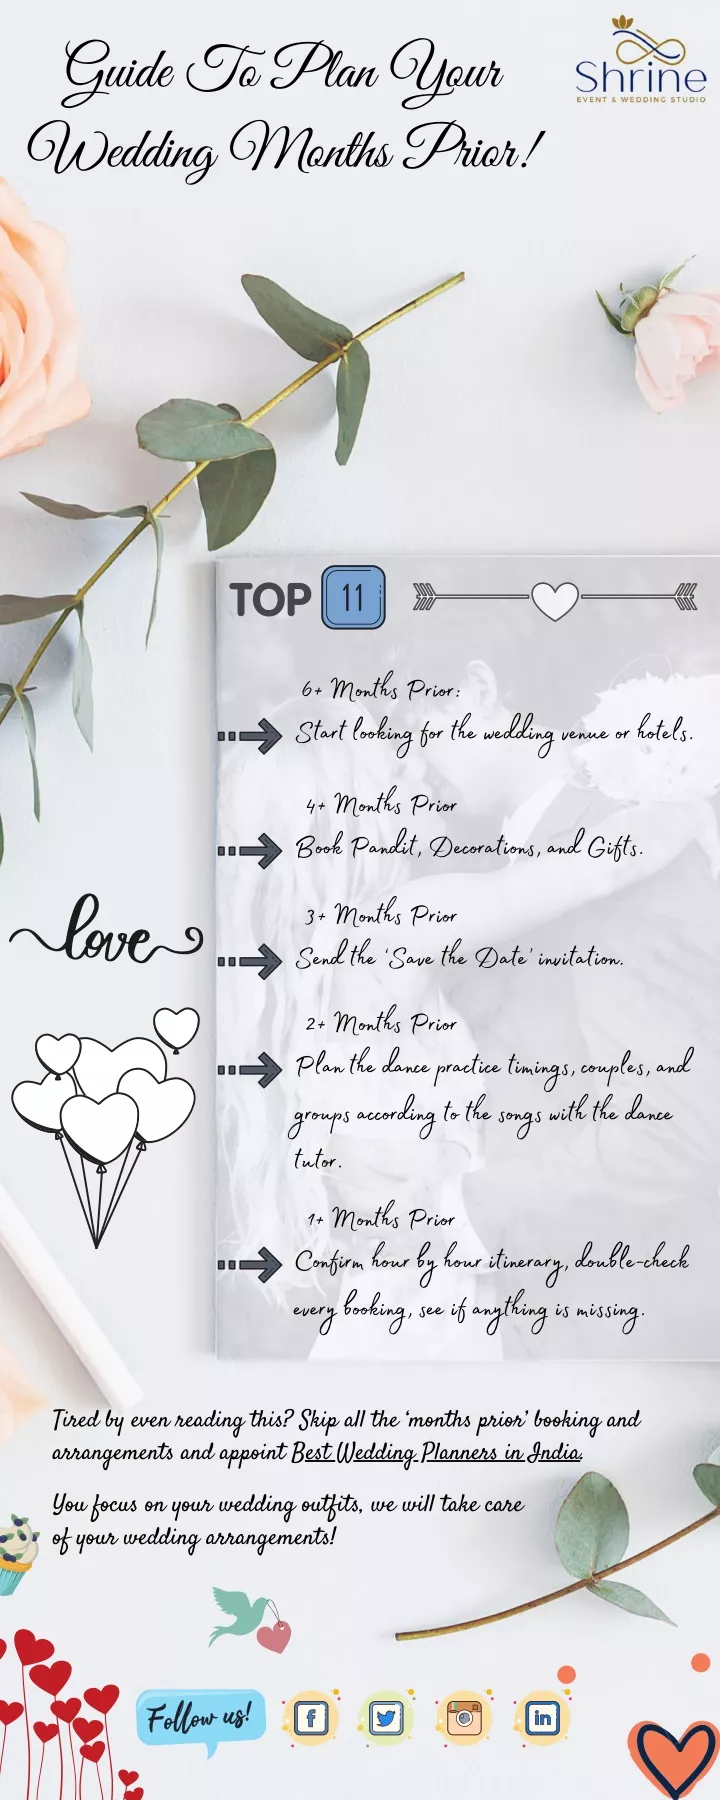 guide to plan your wedding months prior